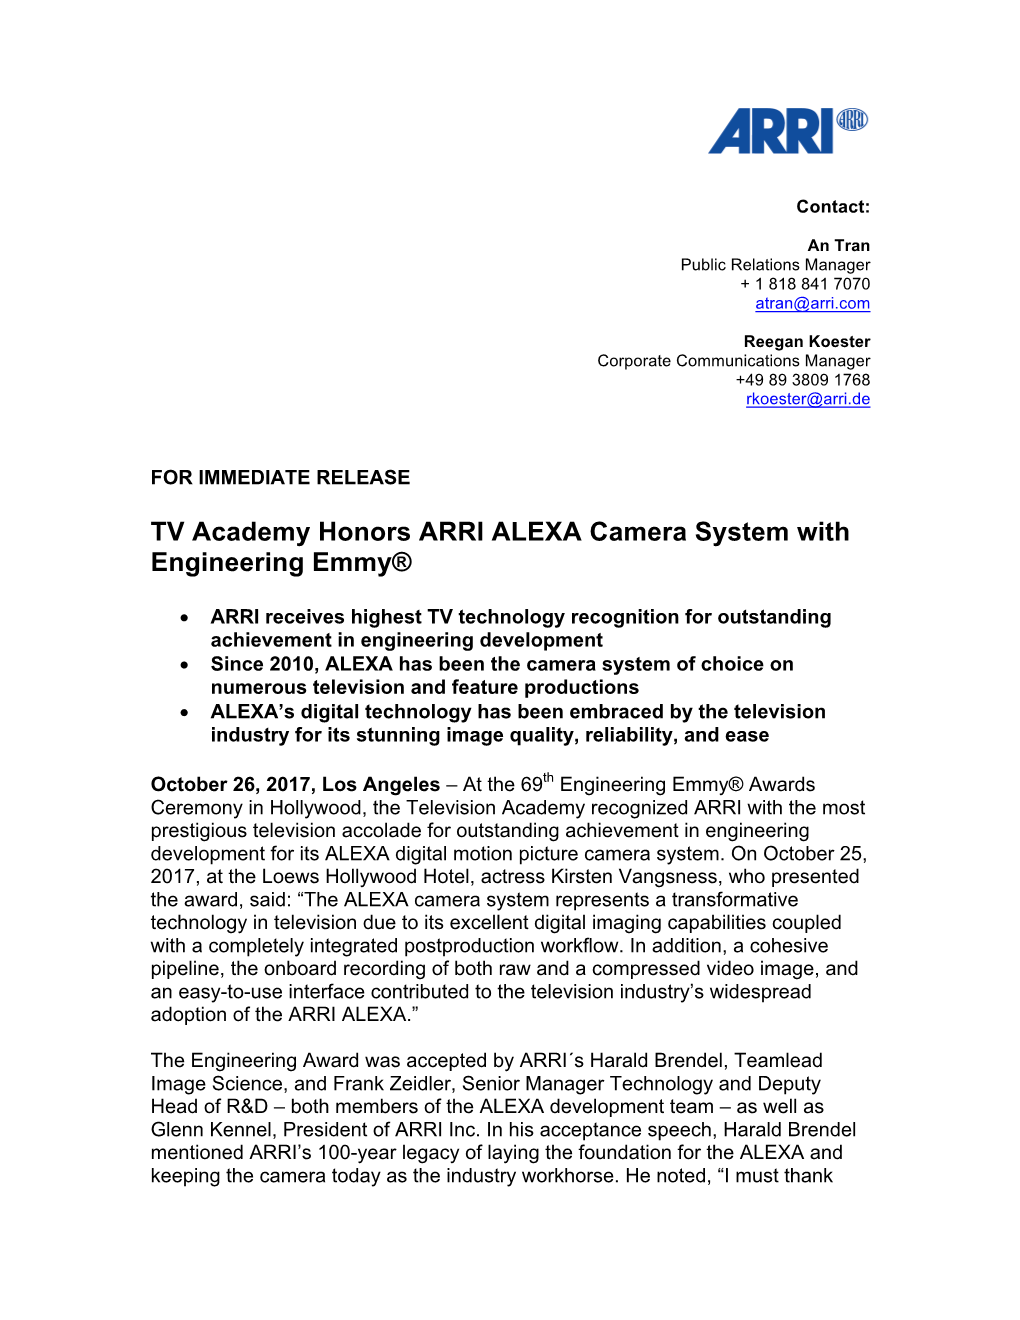 TV Academy Honors ARRI ALEXA Camera System with Engineering Emmy®